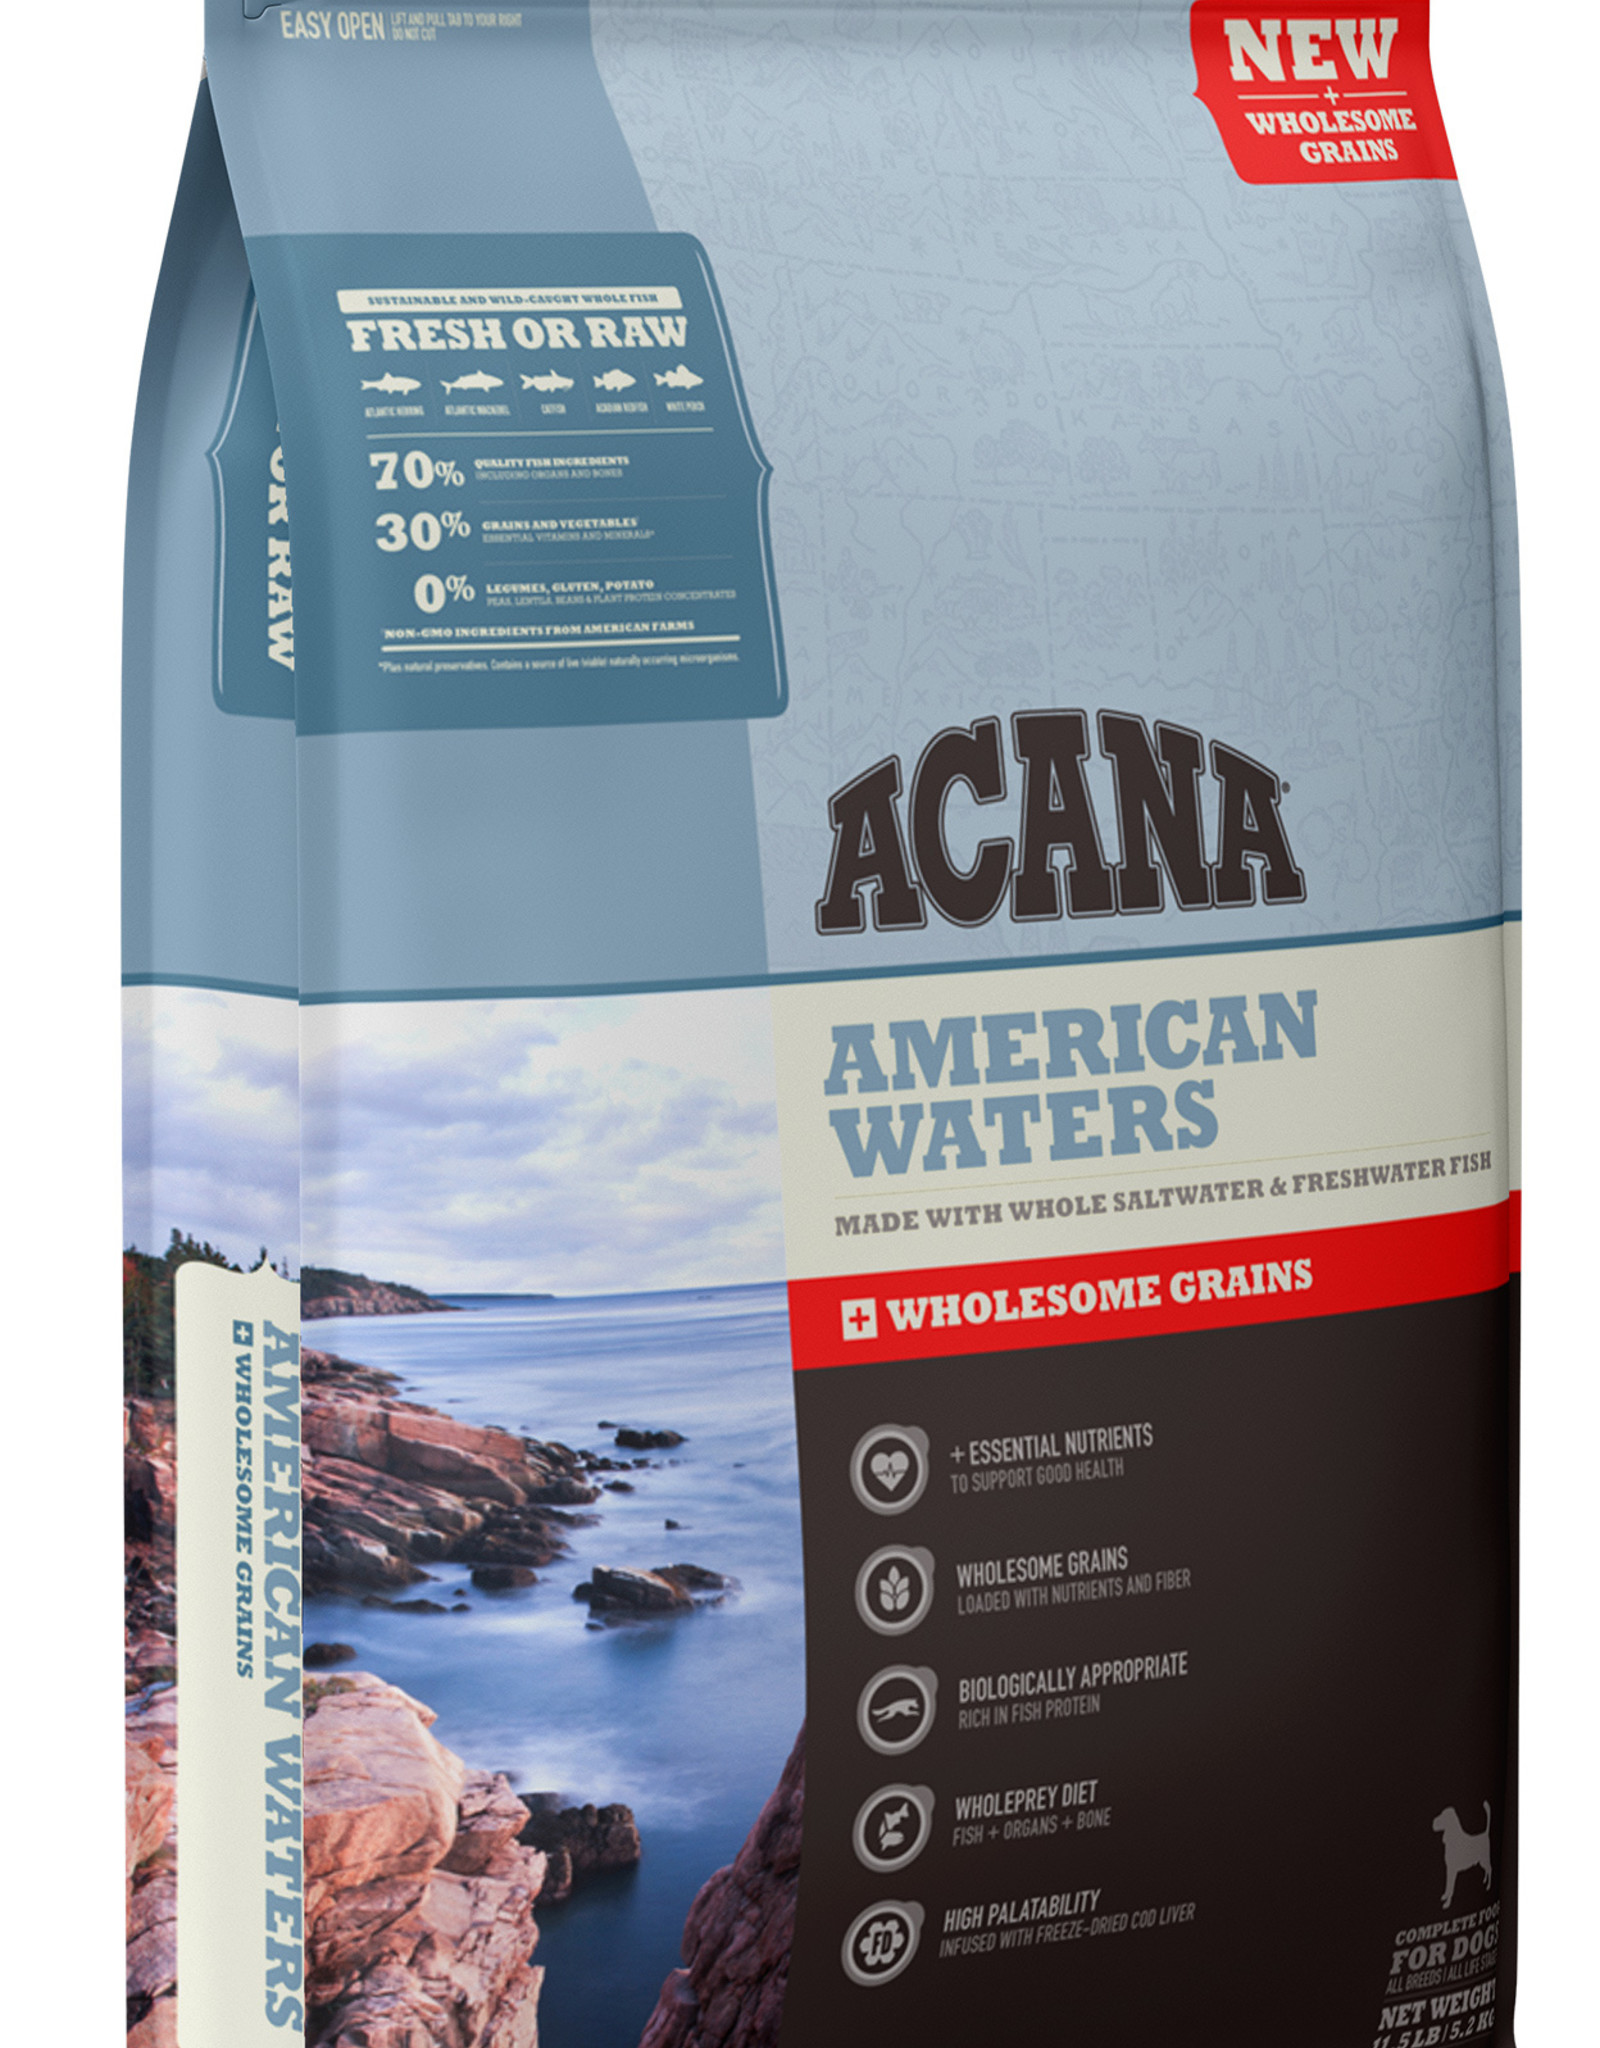 CHAMPION PET FOOD ACANA AMERICAN WATERS WHOLESOME GRAINS 22.5LBS